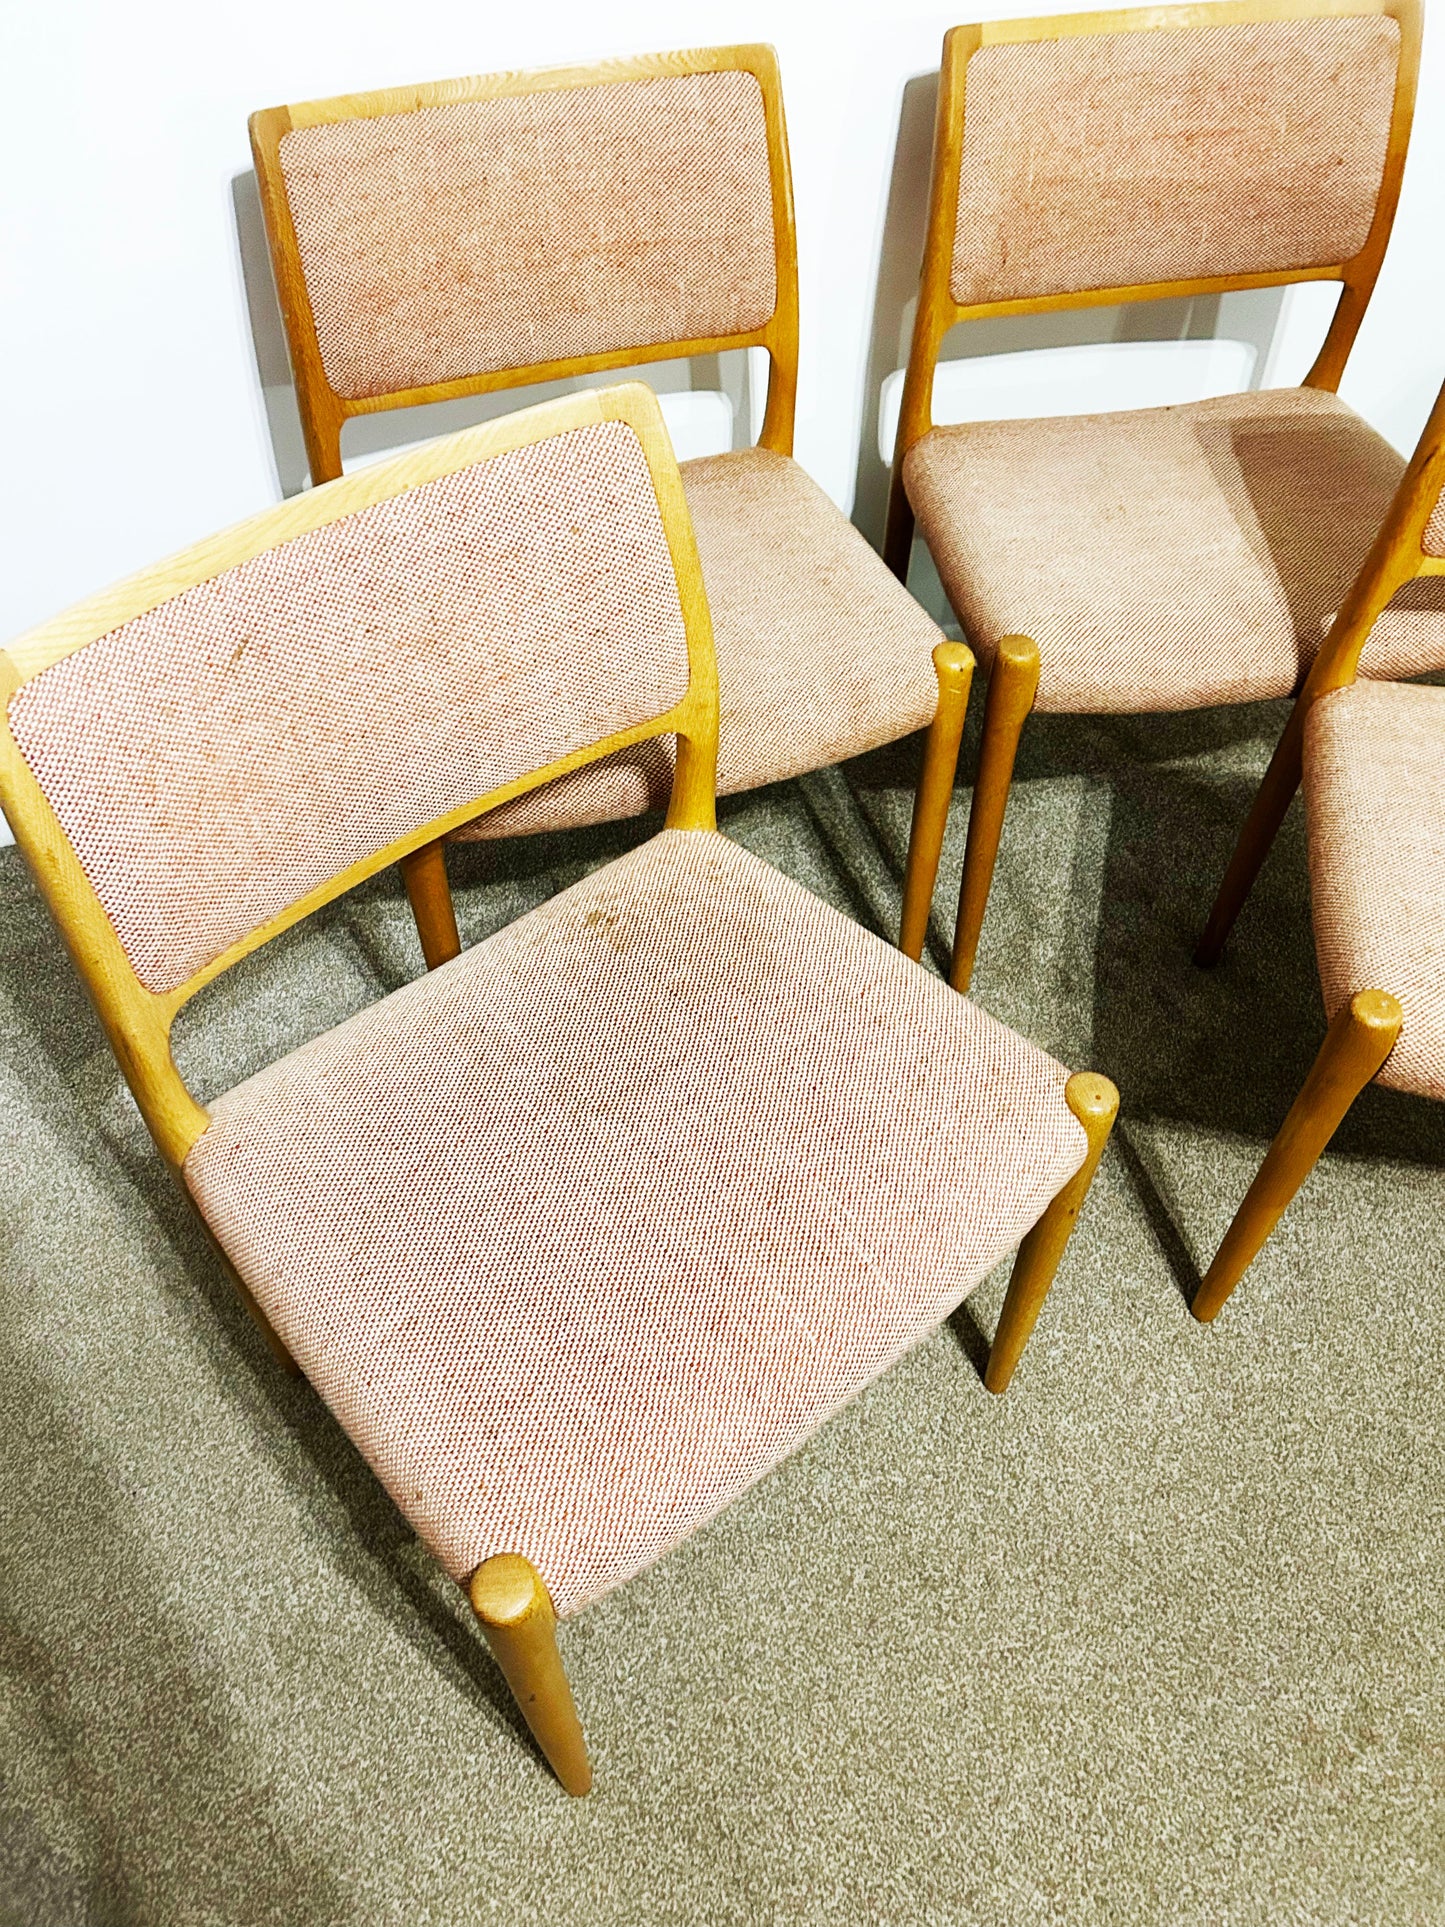 Niels Otto Moller Model 80 Set of Six Scandinavian Design Dining Chairs in Pink Fabric and Teak Frame, Denmark, 1960s. Marshall Walker Antique & Vintage Furniture